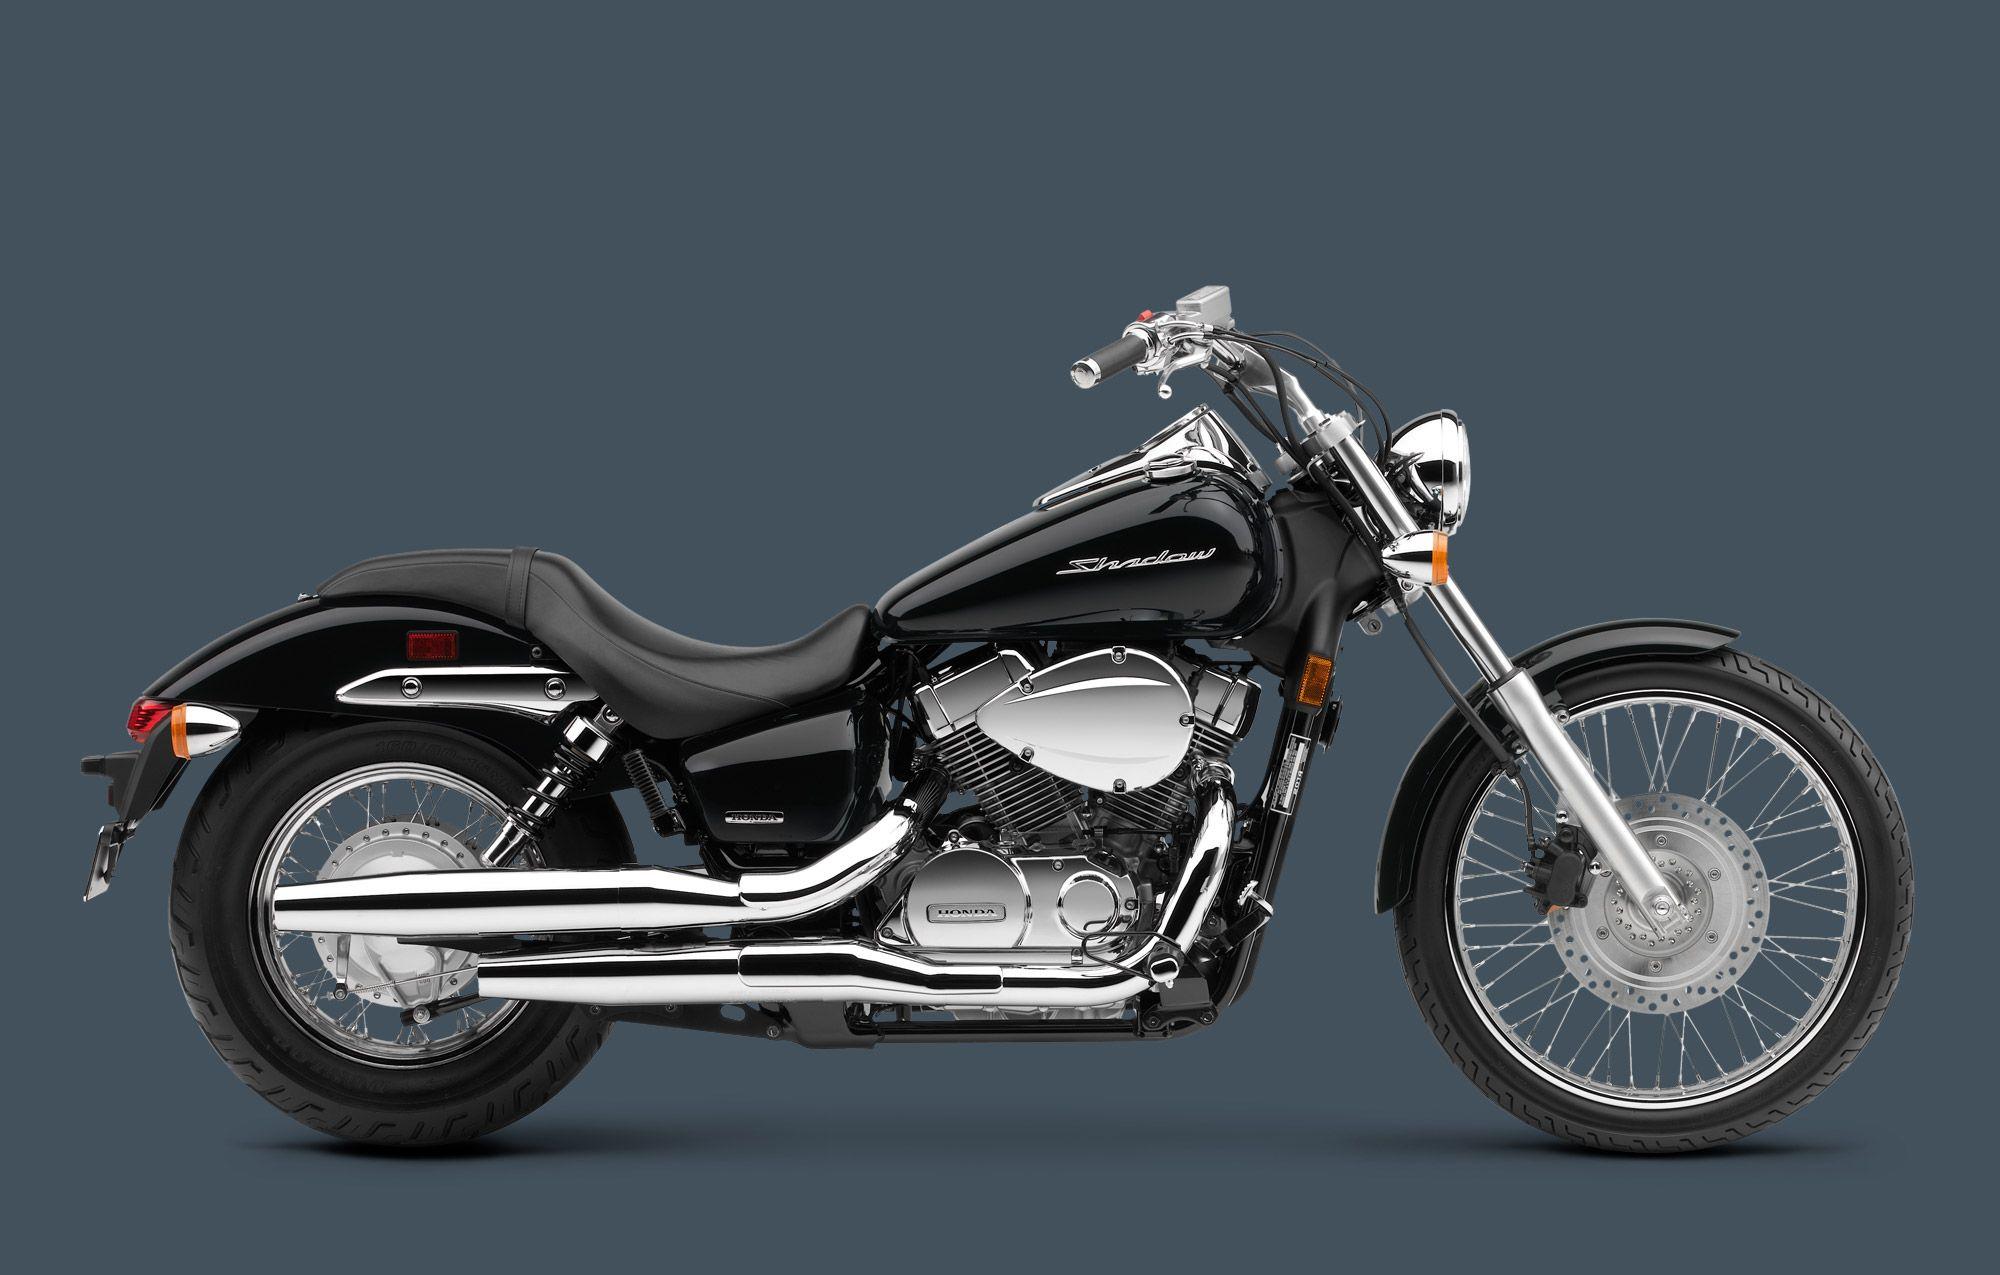 Honda Shadow Spirit still Classic after All These Years